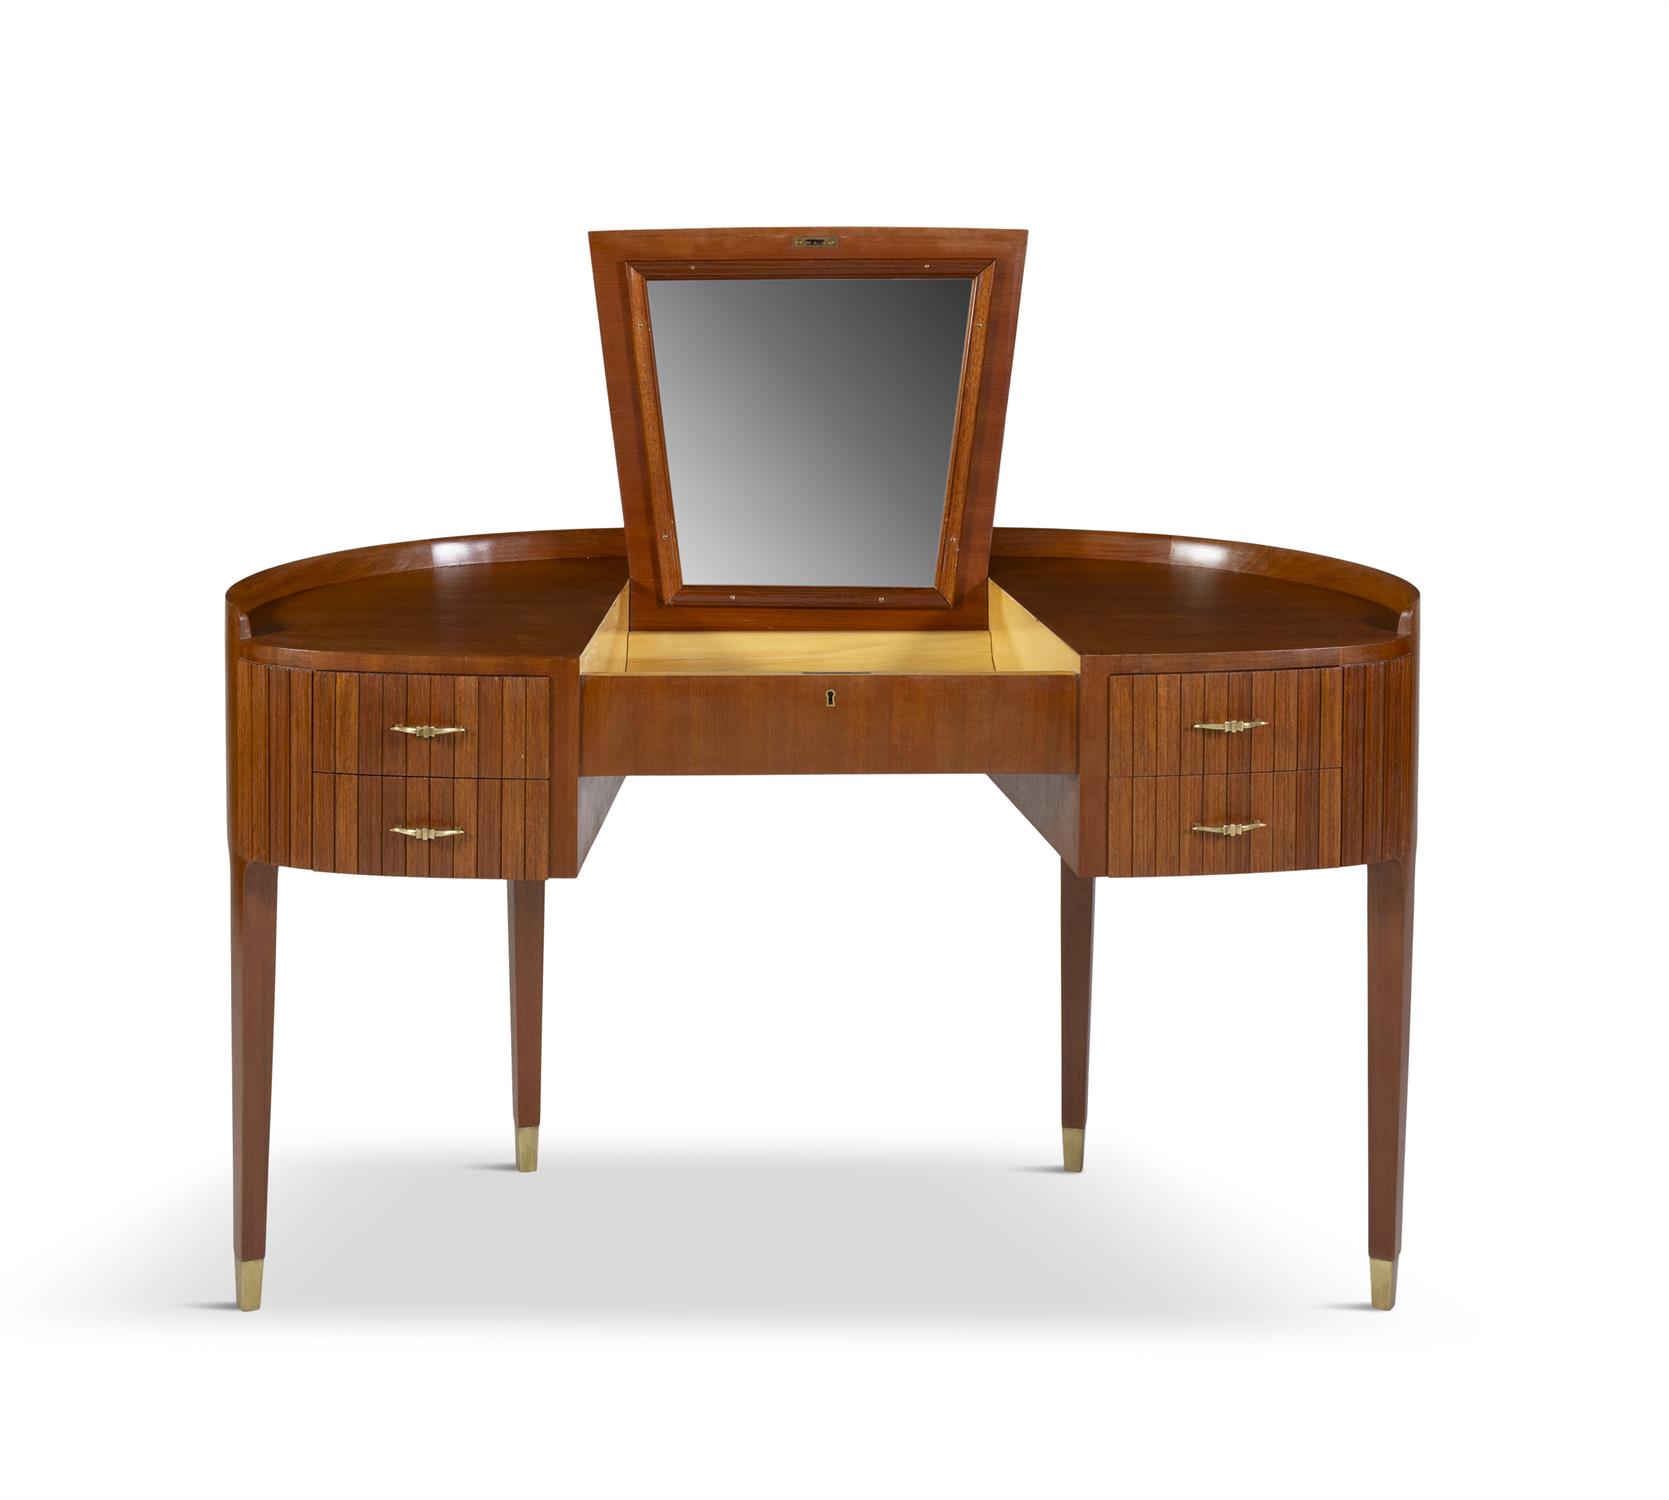 PAOLO BUFFA (1903 - 1970) A mahogany dressing table by Paolo Buffa for Ducrot with maple interior - Image 5 of 10